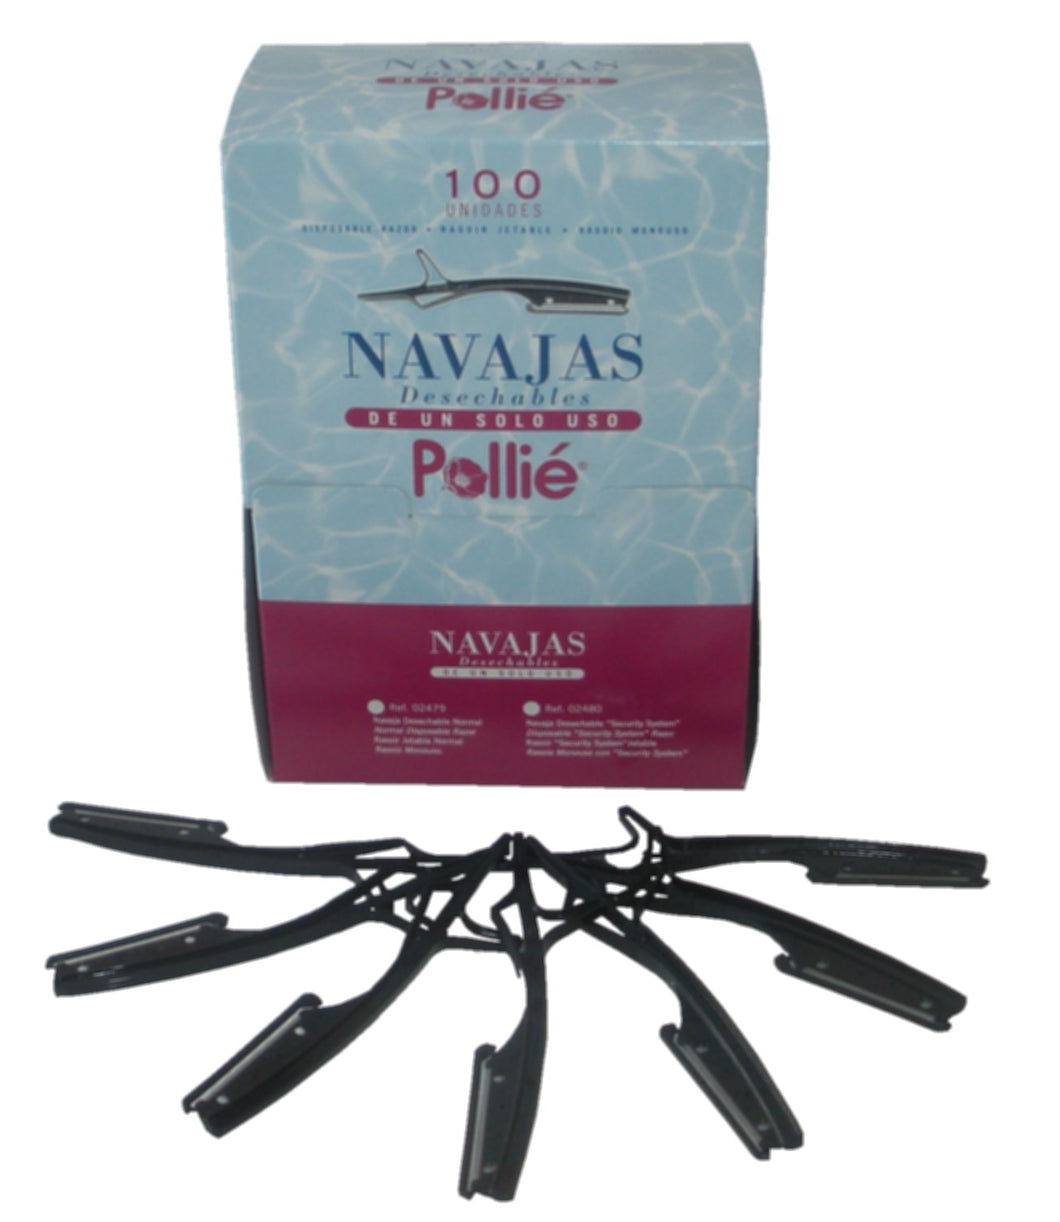 Navajas Disposable Razors for Salons, Barbers or Home